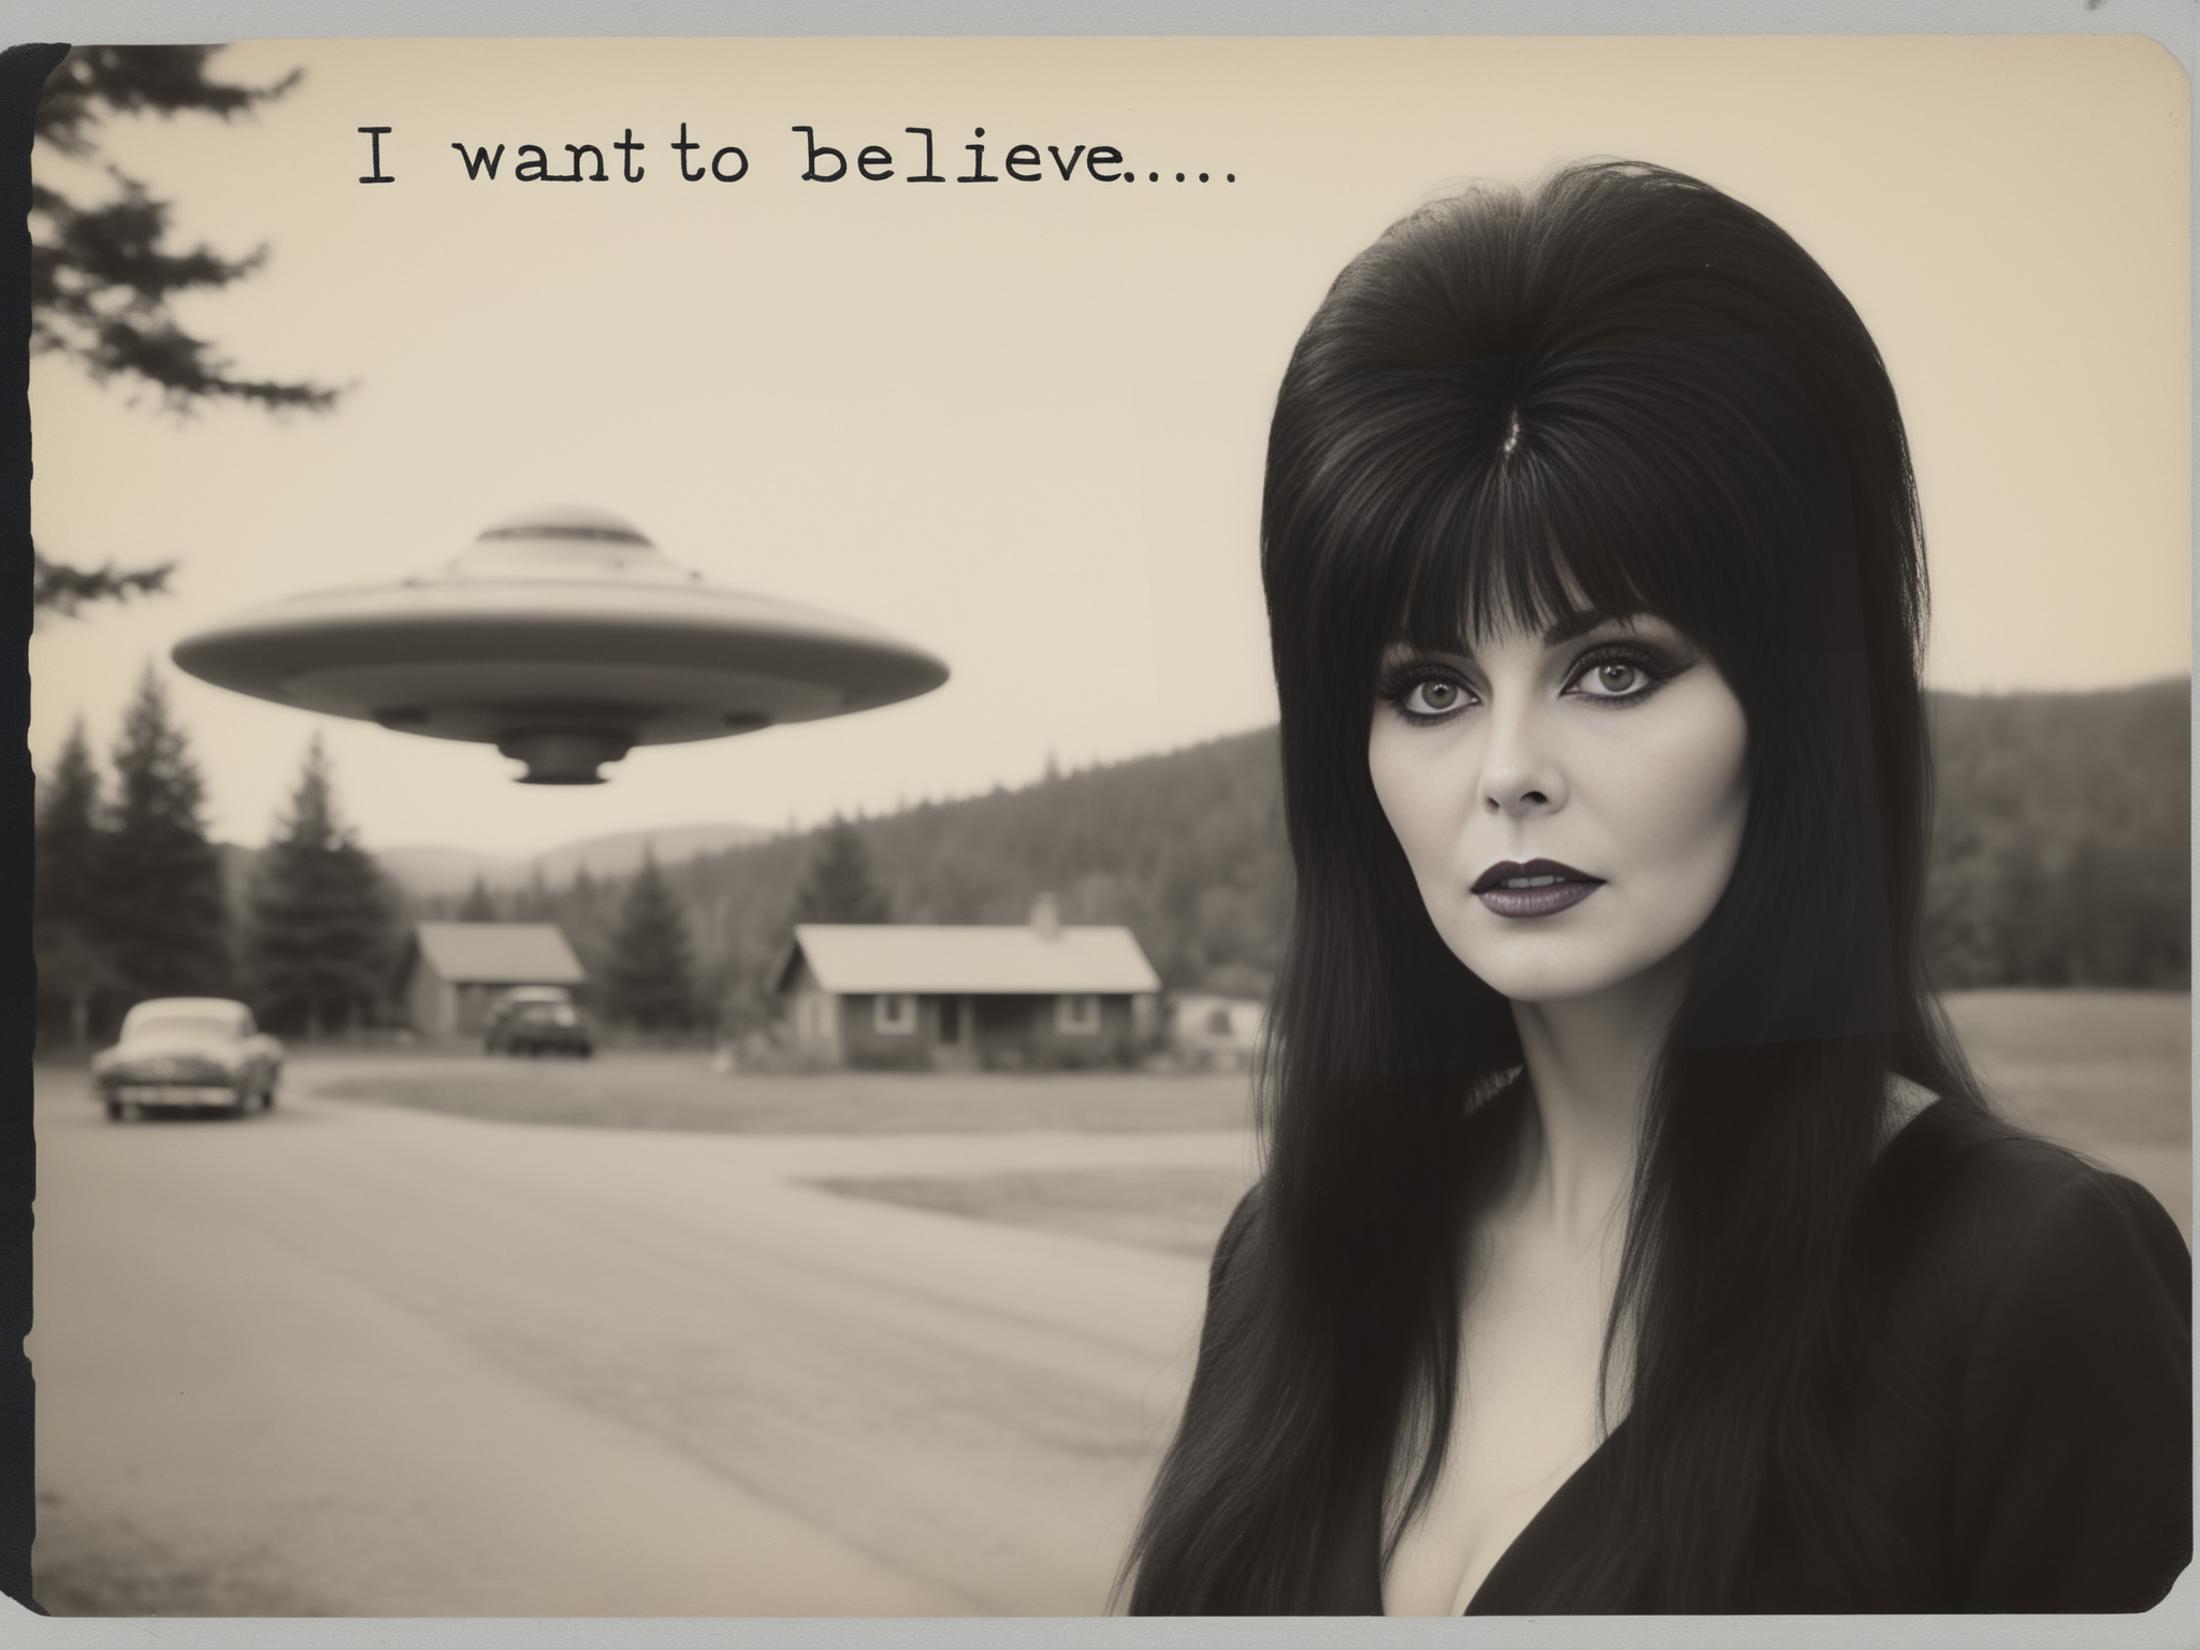 A woman with long hair and a black dress standing in front of a flying saucer.